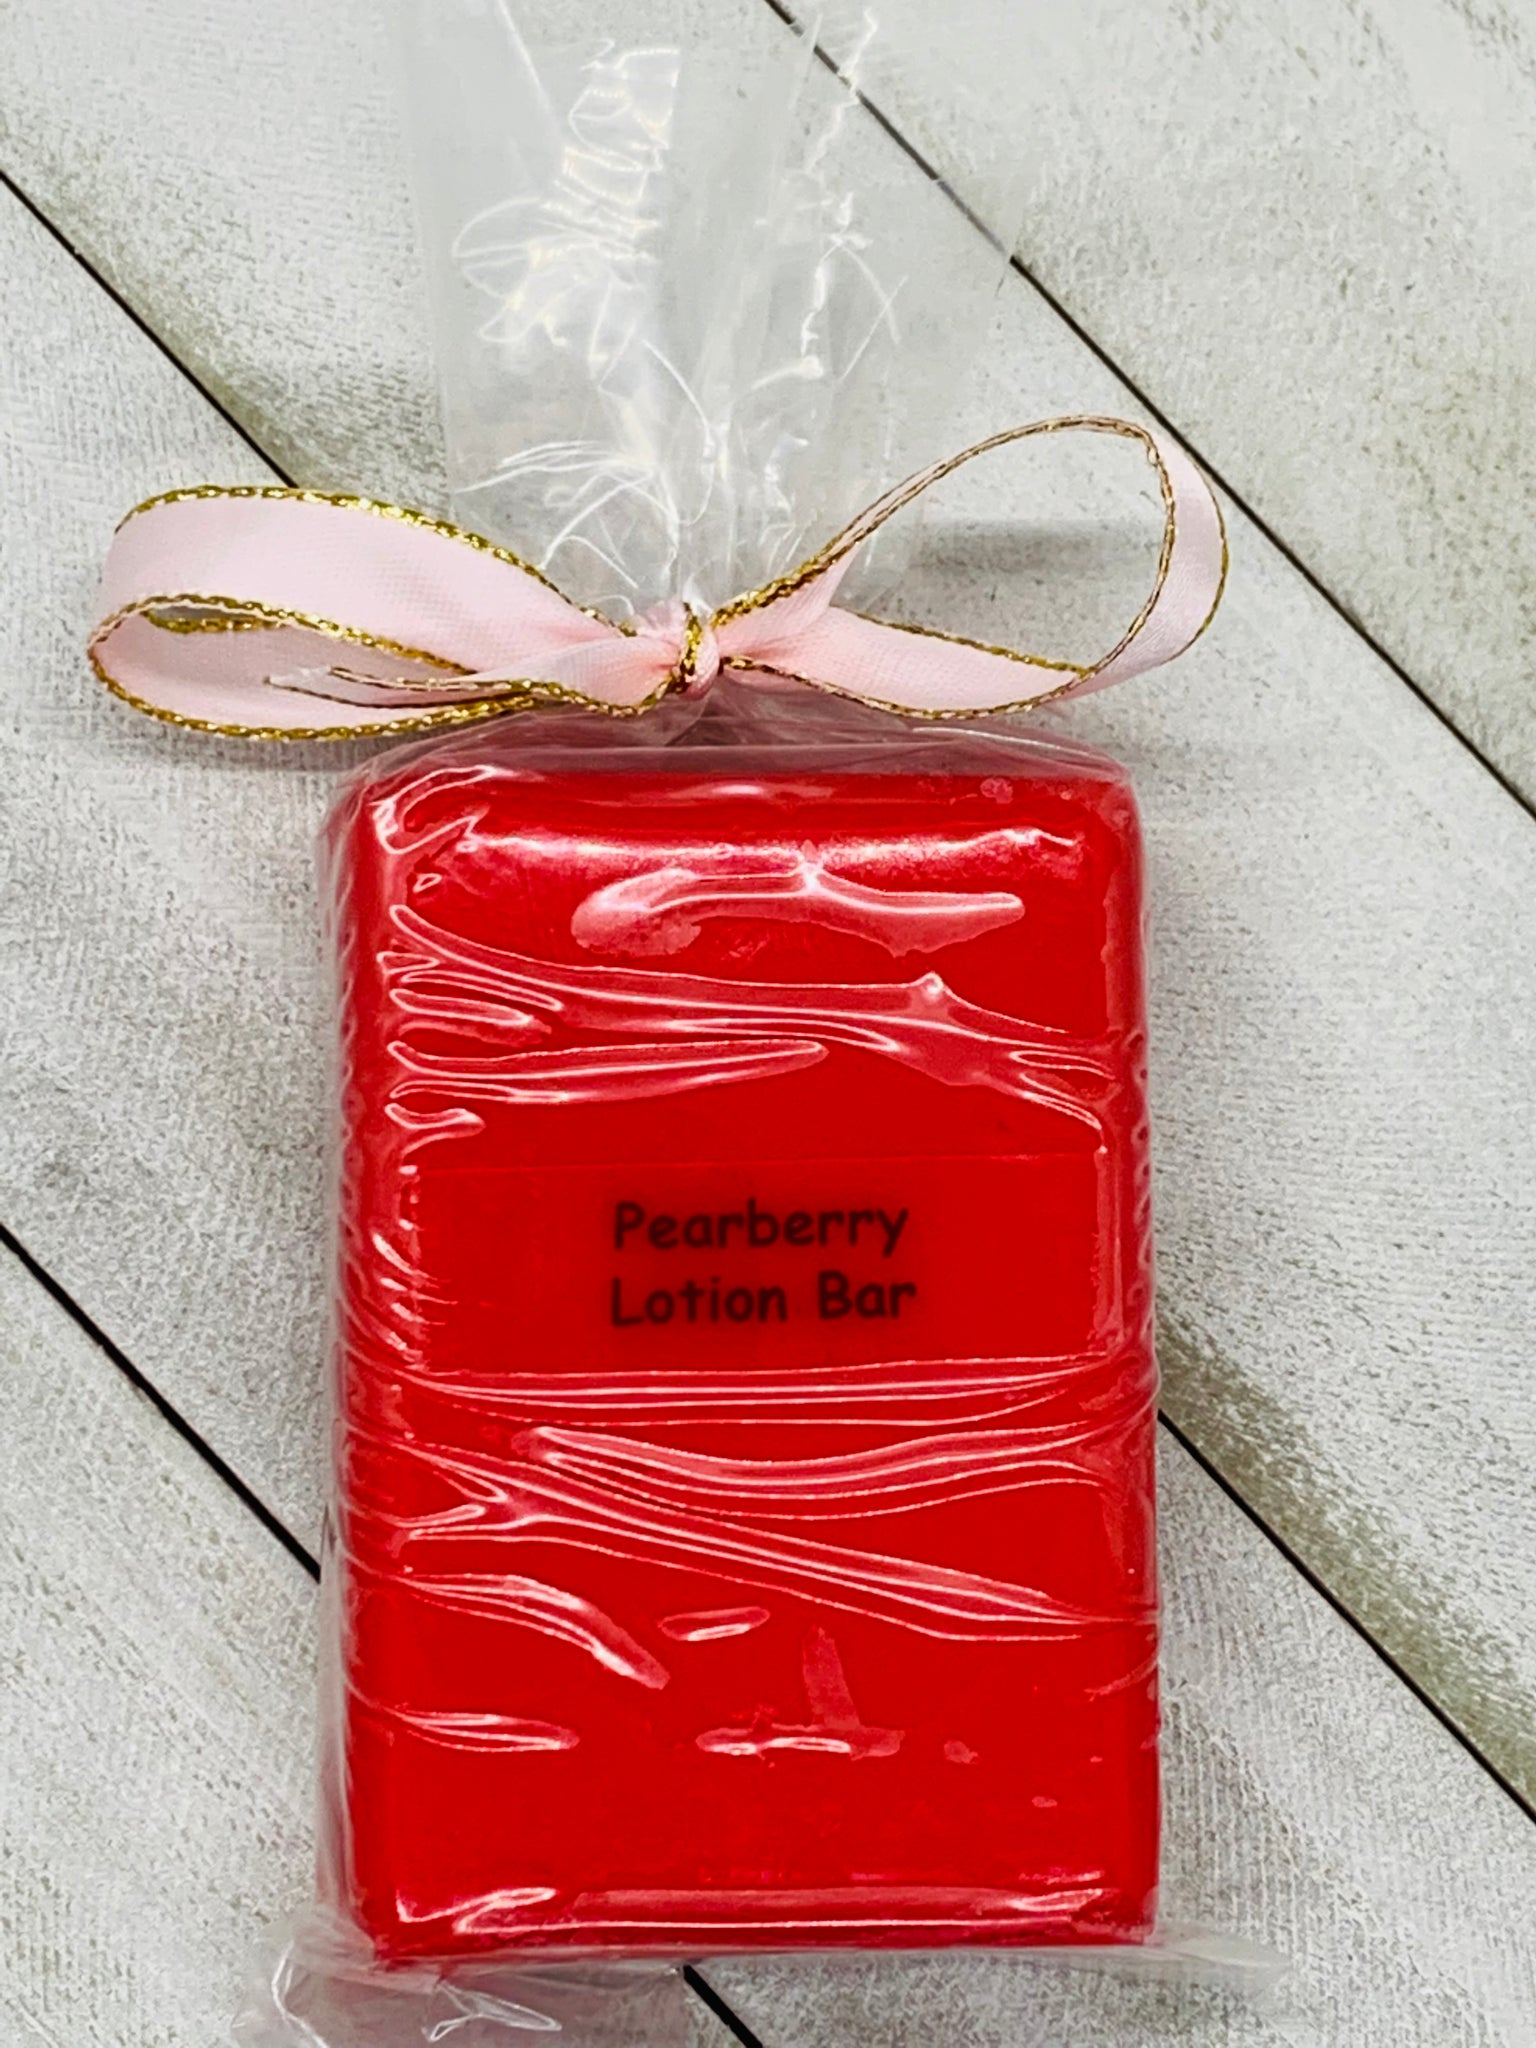 Pearberry Lotion Bar